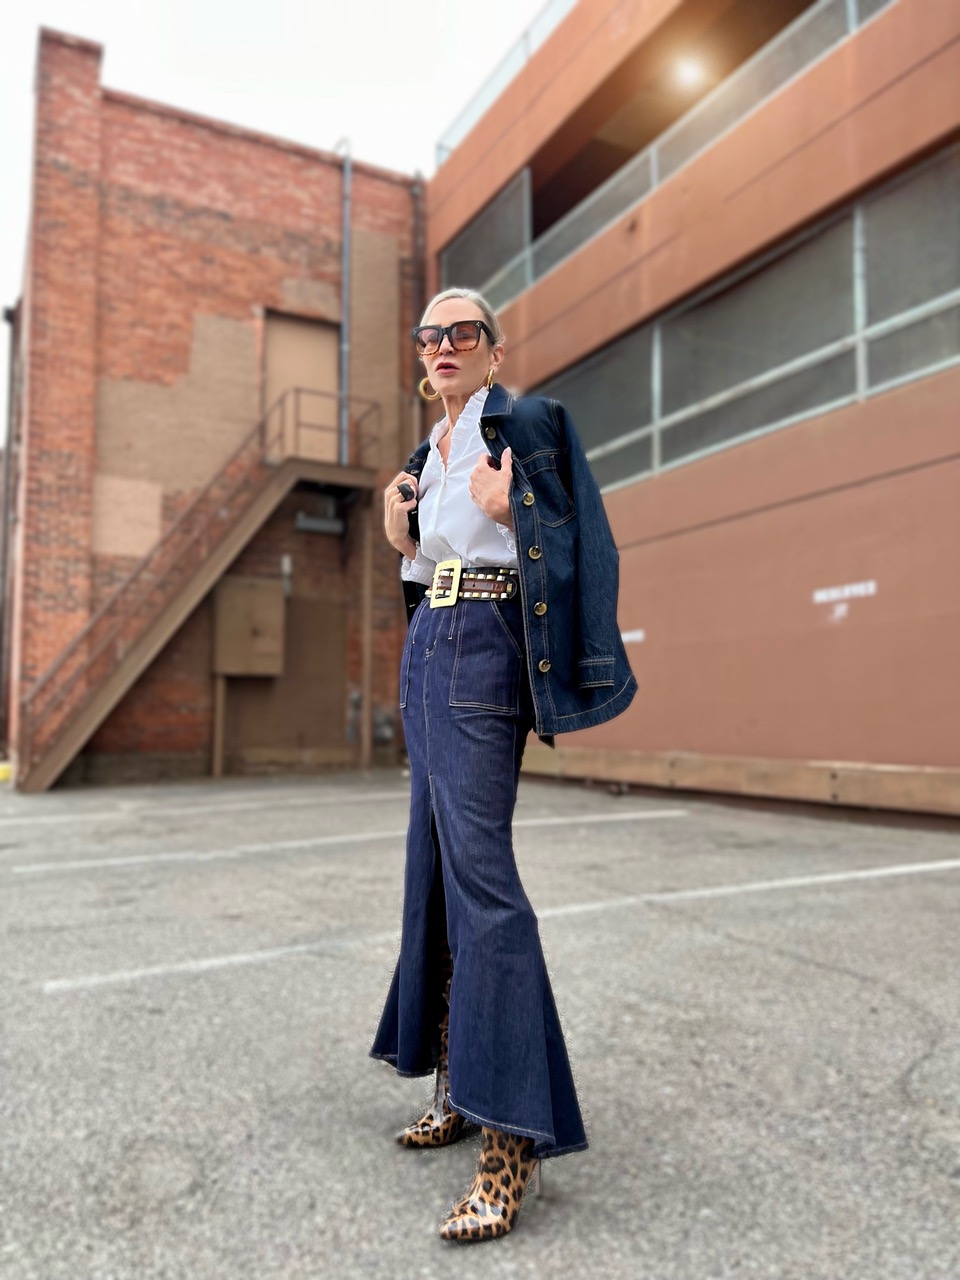 Lifestyle Influencer, Jamie Lewinger of More Than Turquoise wearing stonewashed stretch denim woven maxi skirt from Karen Millen 